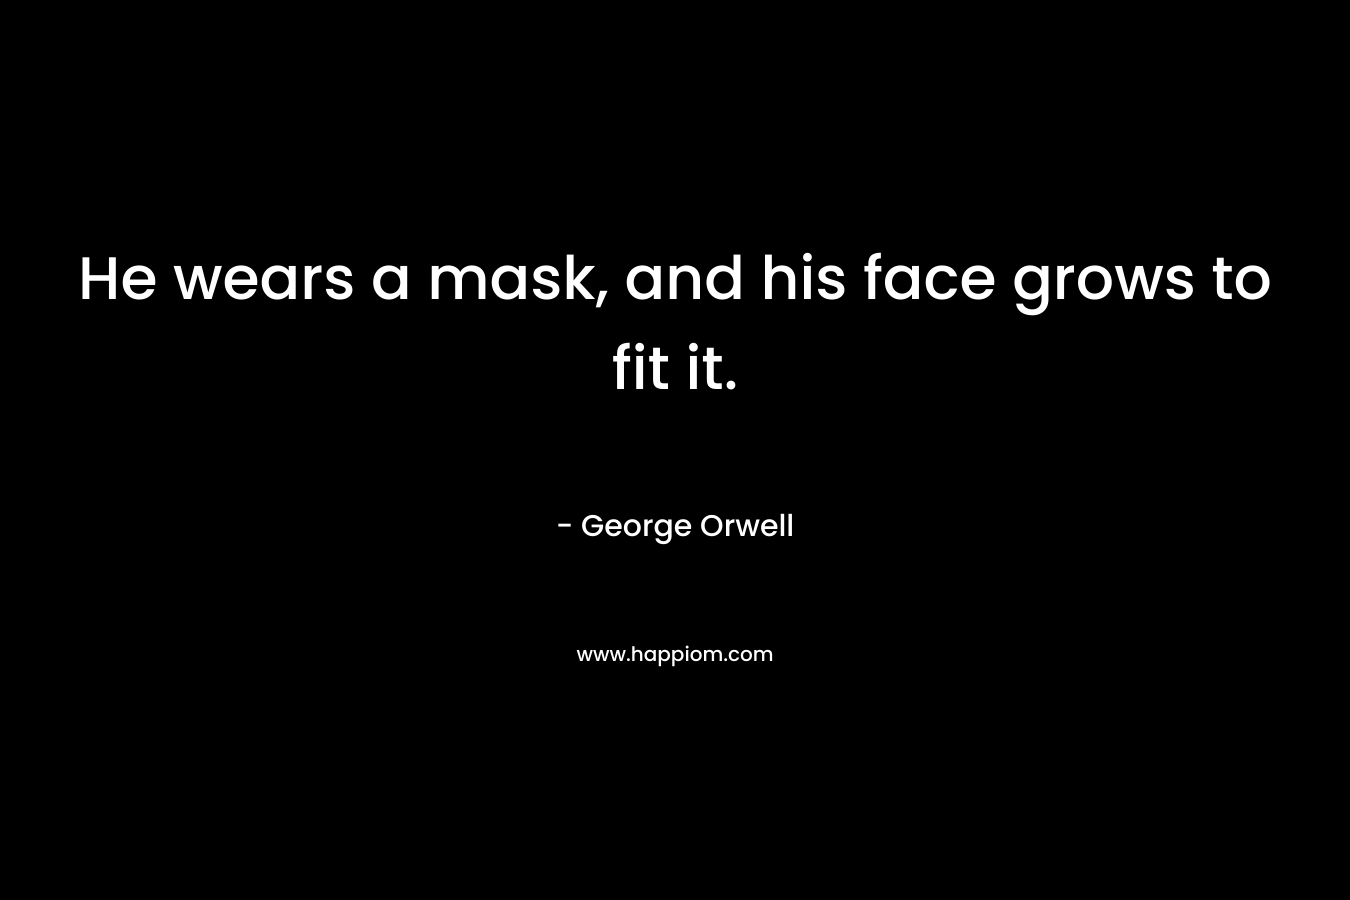 He wears a mask, and his face grows to fit it. – George Orwell